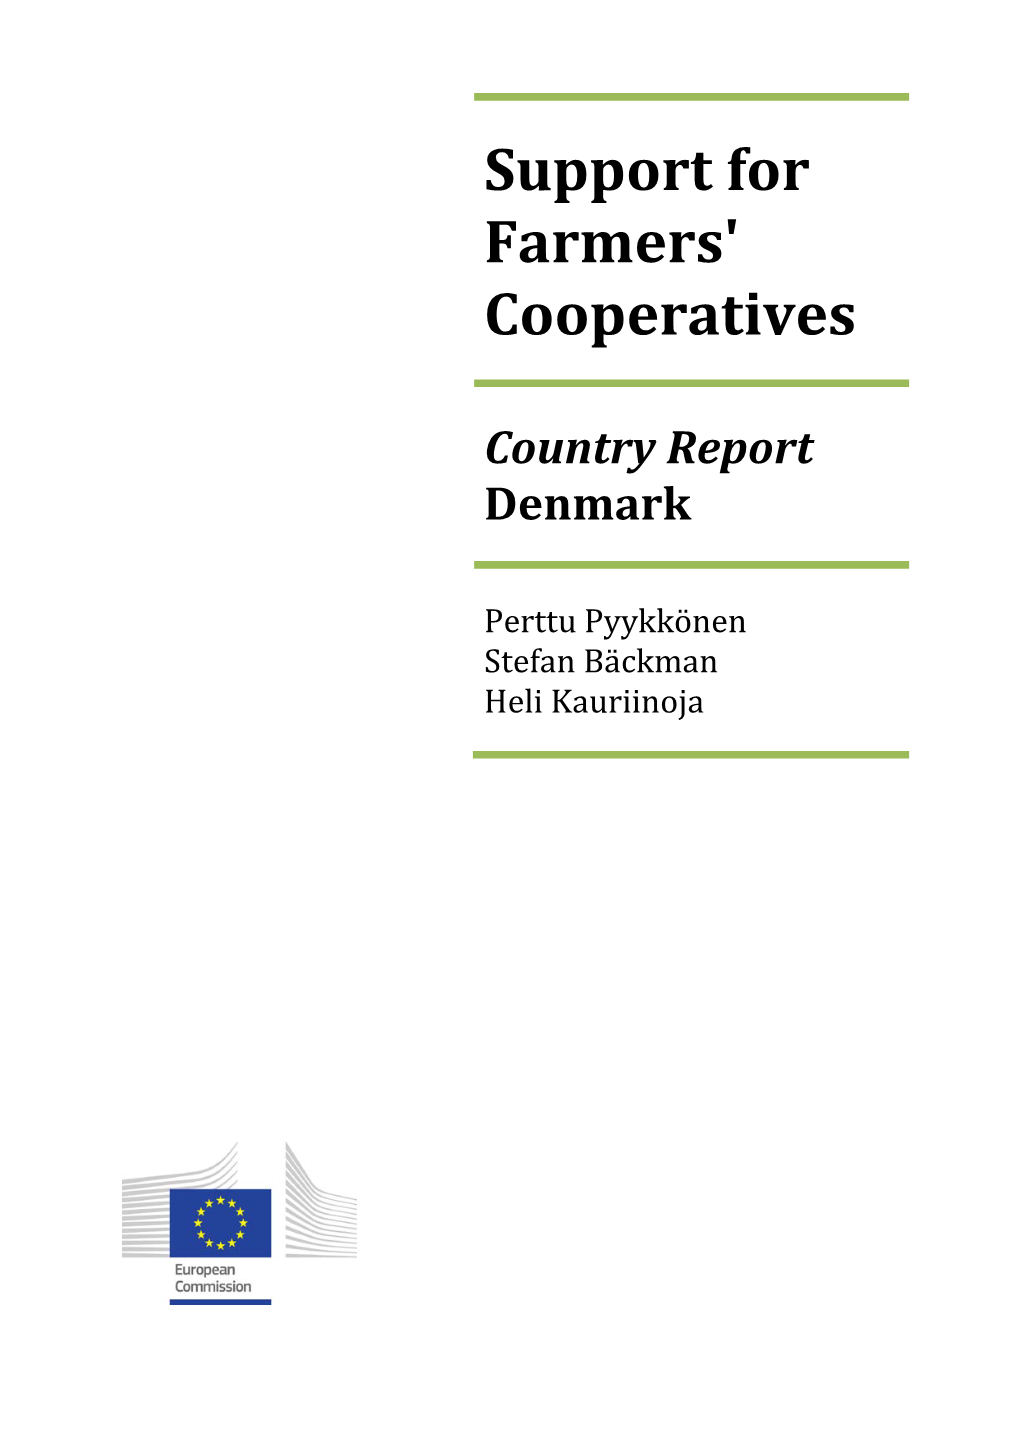 Support for Farmers' Cooperatives Country Report Denmark